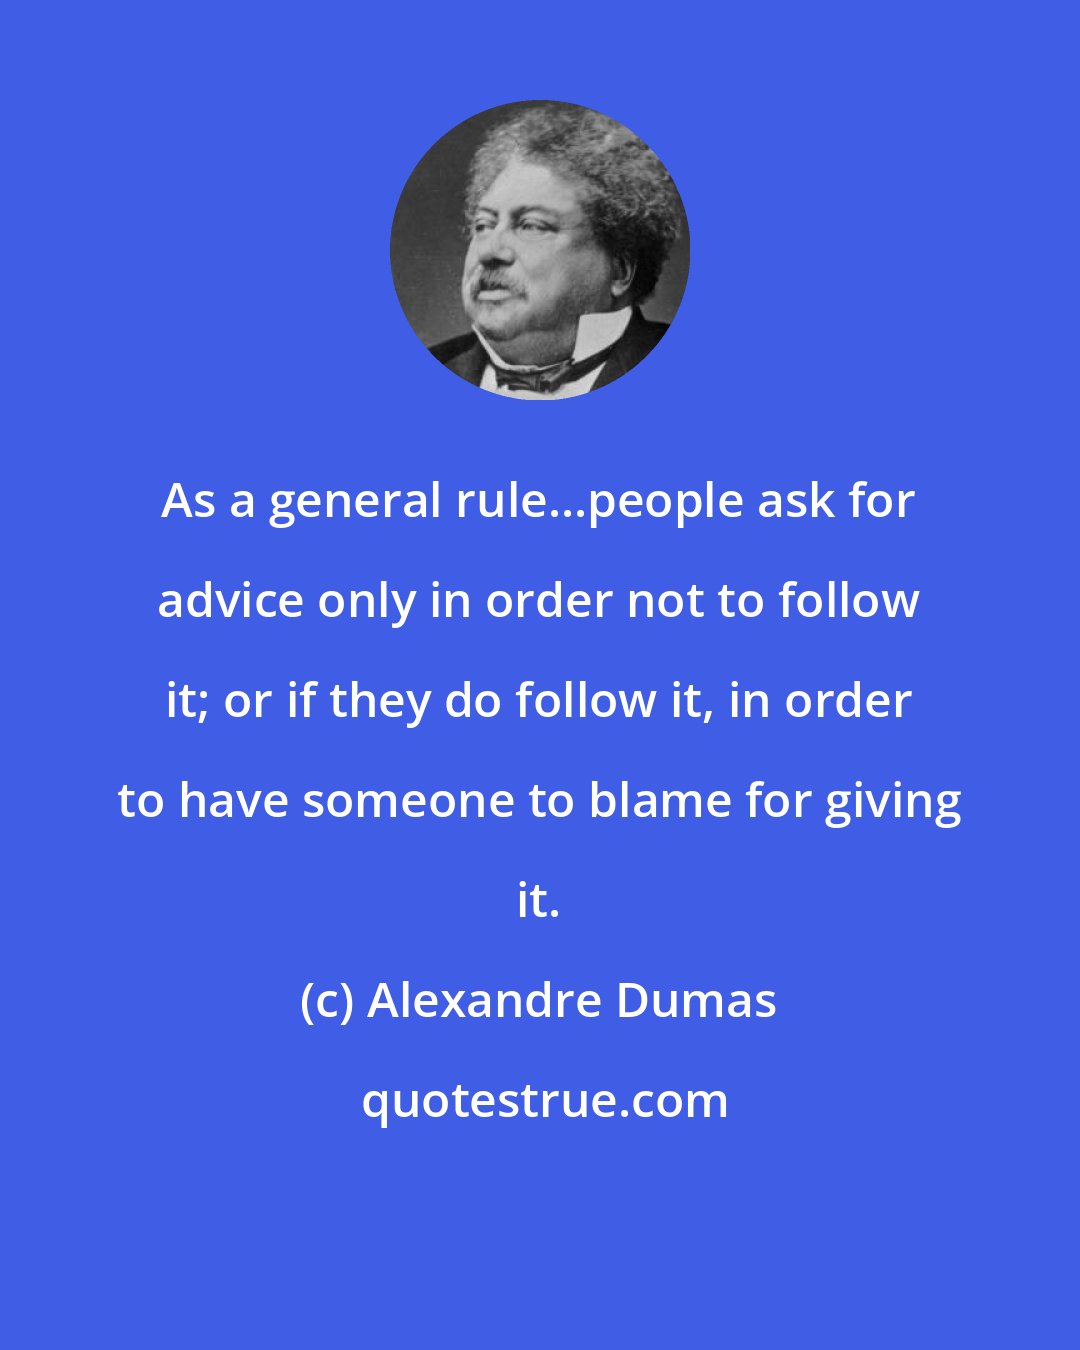 Alexandre Dumas: As a general rule...people ask for advice only in order not to follow it; or if they do follow it, in order to have someone to blame for giving it.